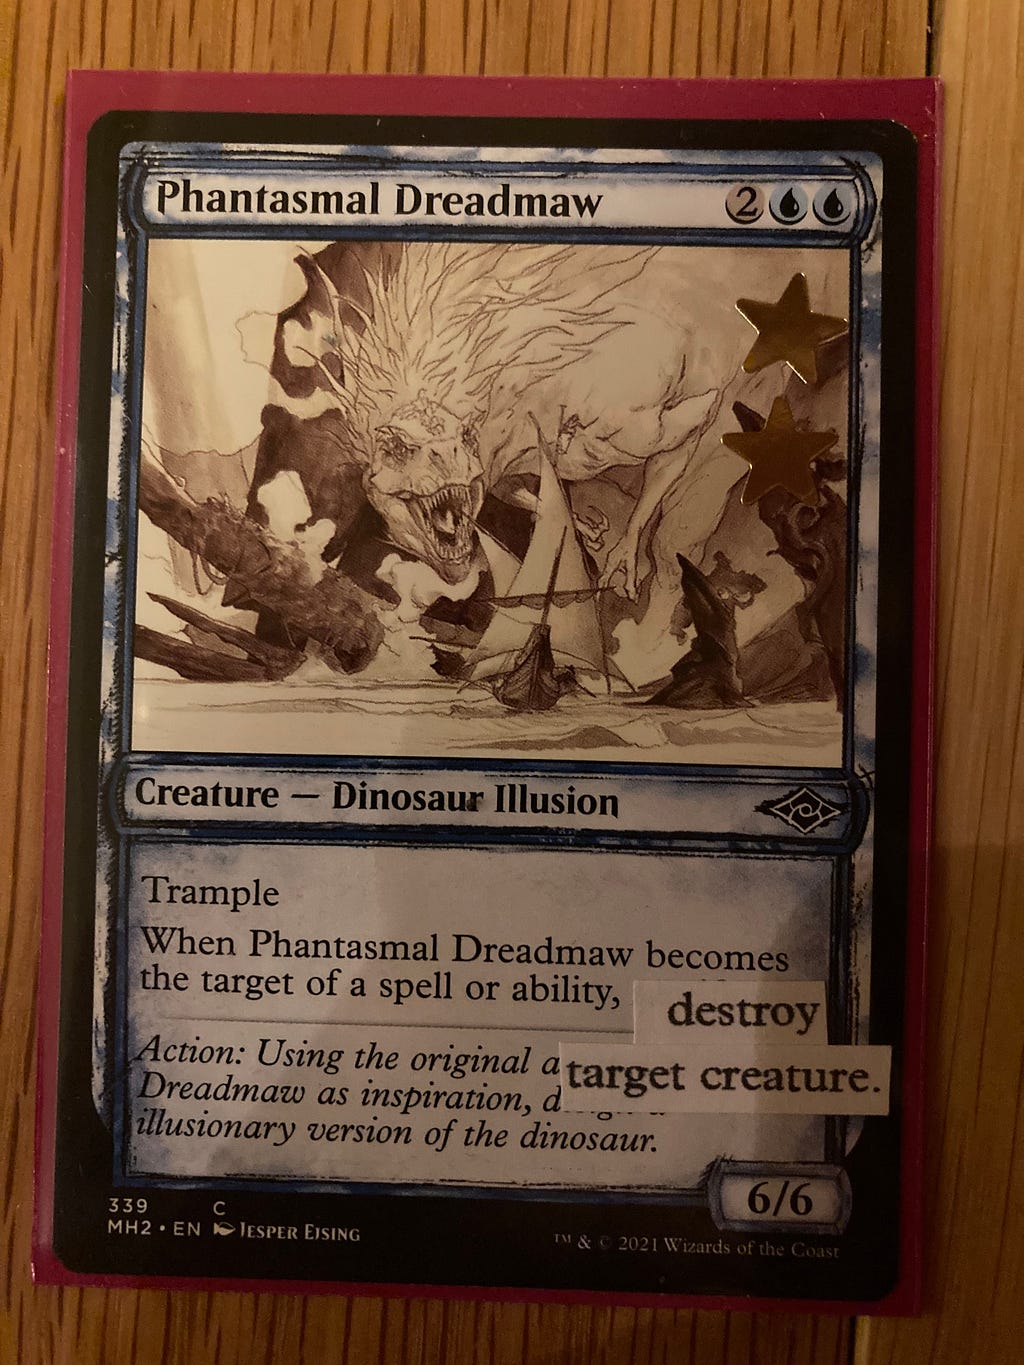 Phantasmal Dreadmaw, altered so that whenever it becomes the target of a spell or ability it destroys target creature.